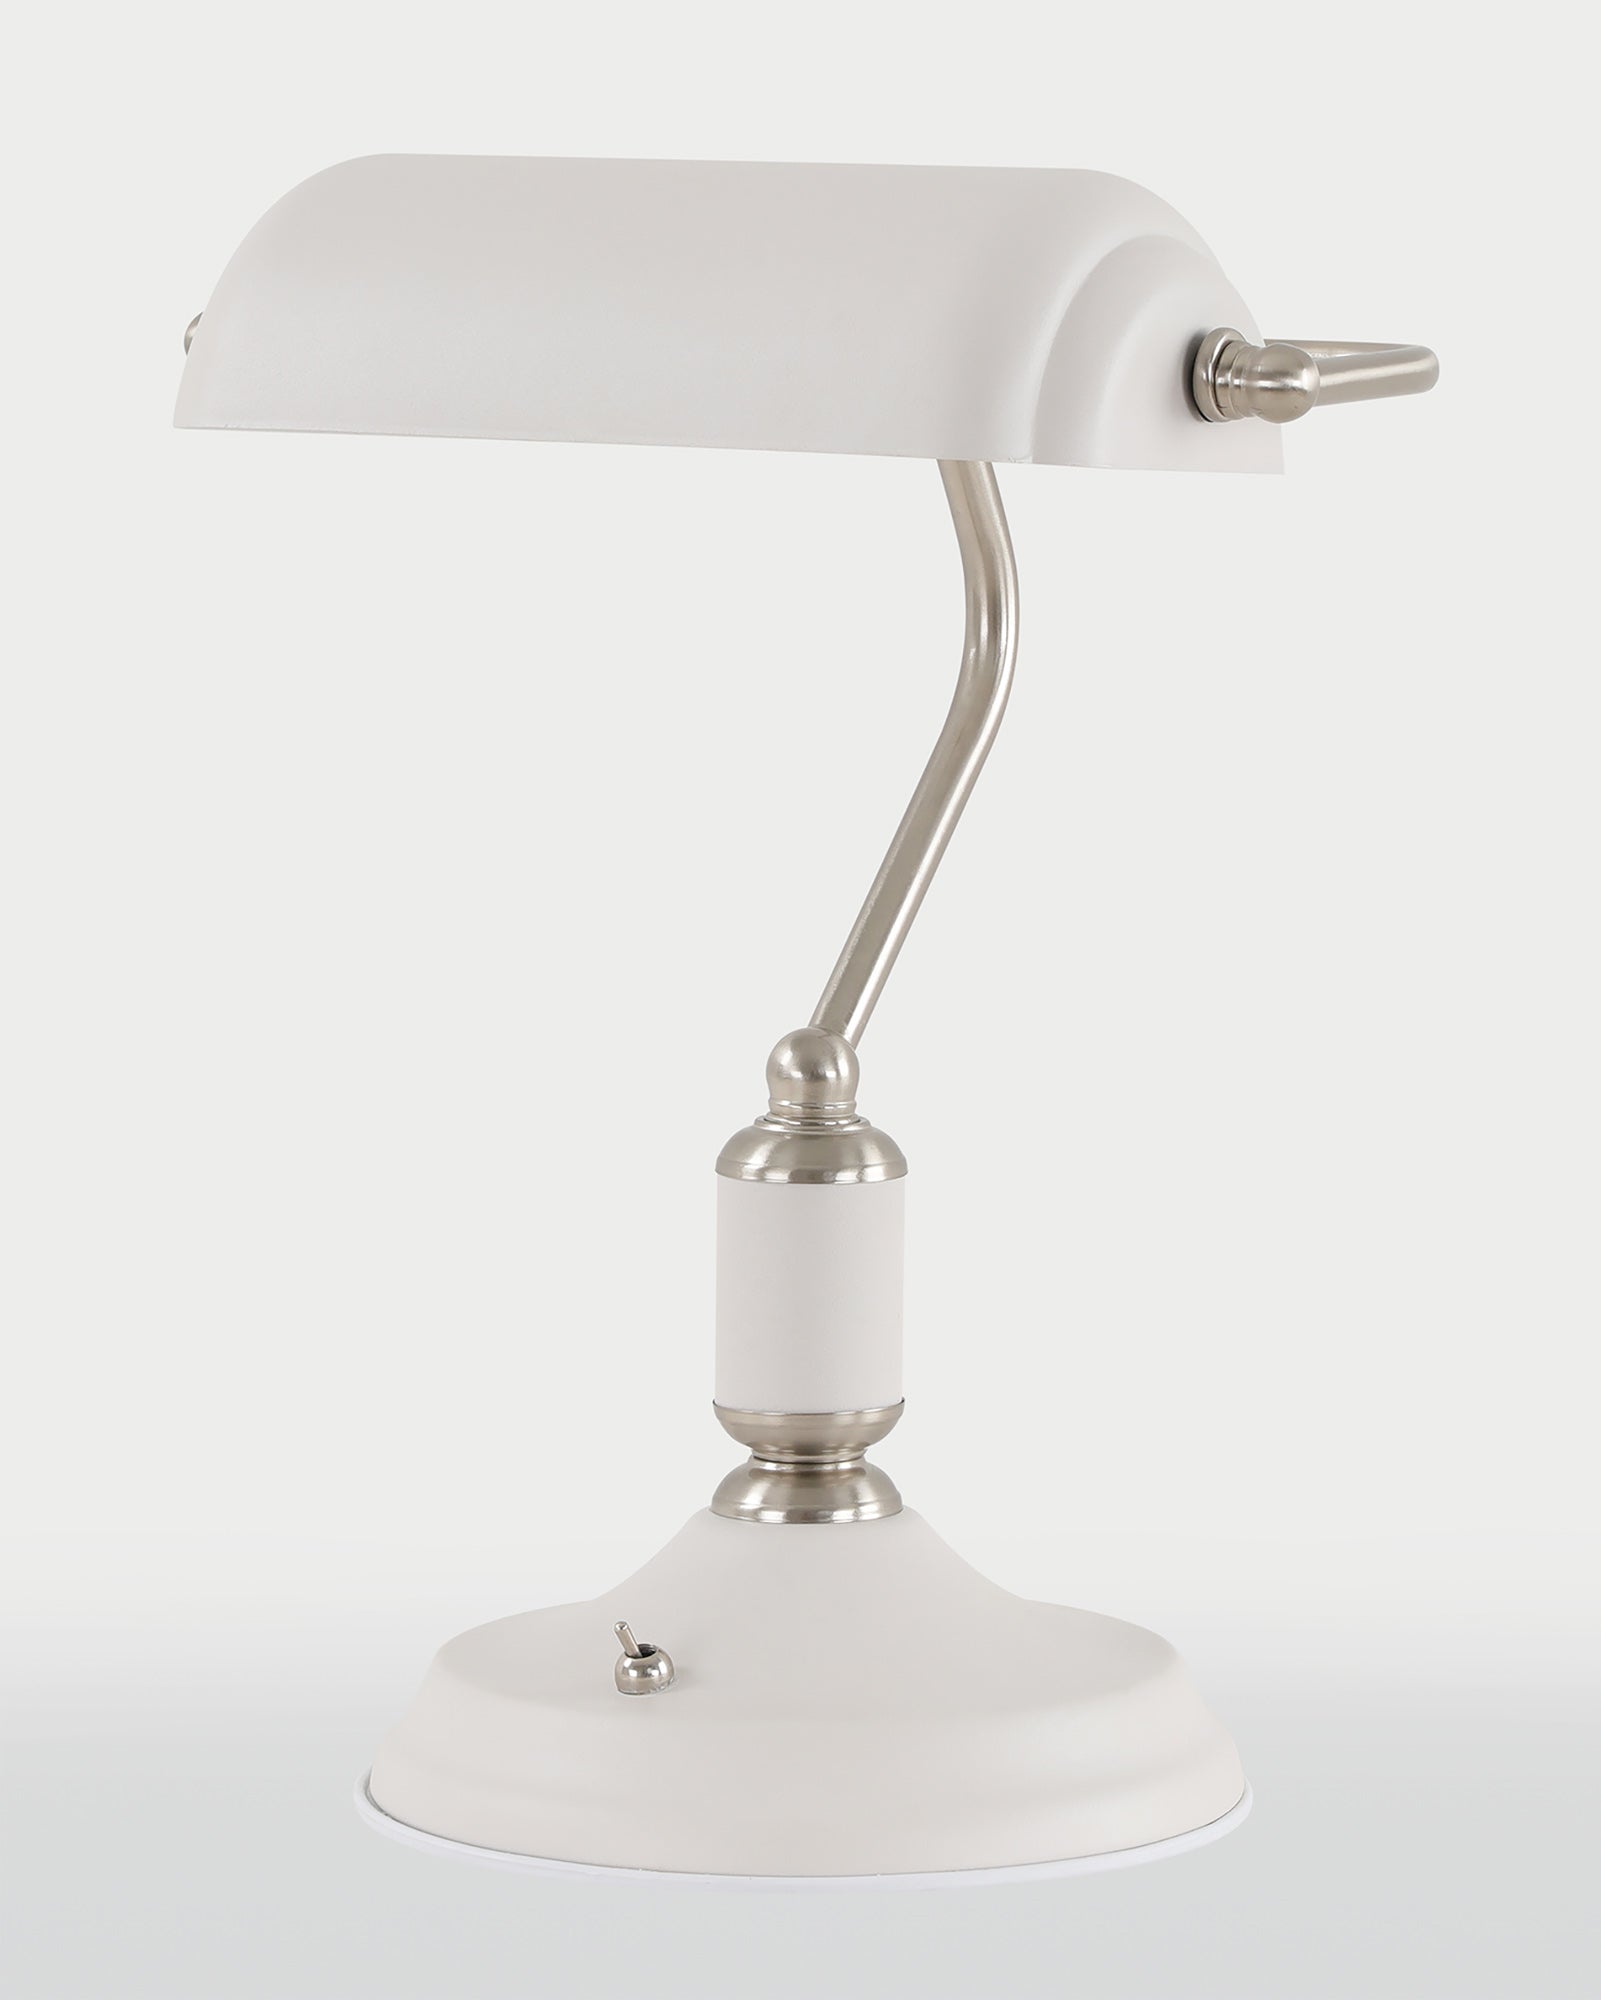 Banker Table Lamp 1 Light With Toggle Switch, Satin Nickel/Sand White